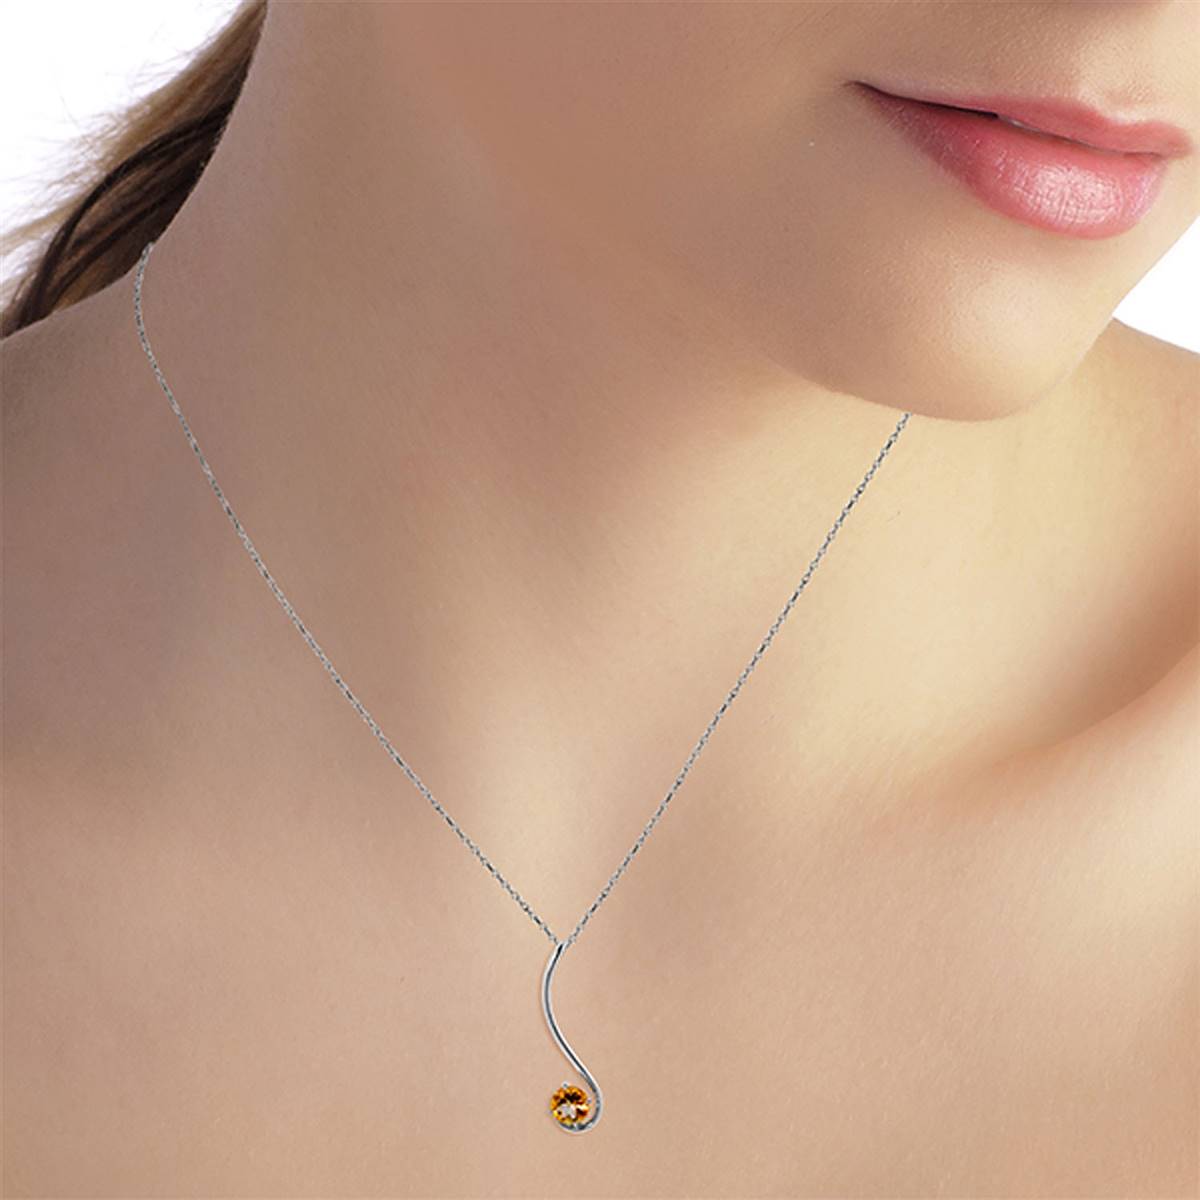 0.55 Carat 14K Solid White Gold Into The Light Citrine Necklace